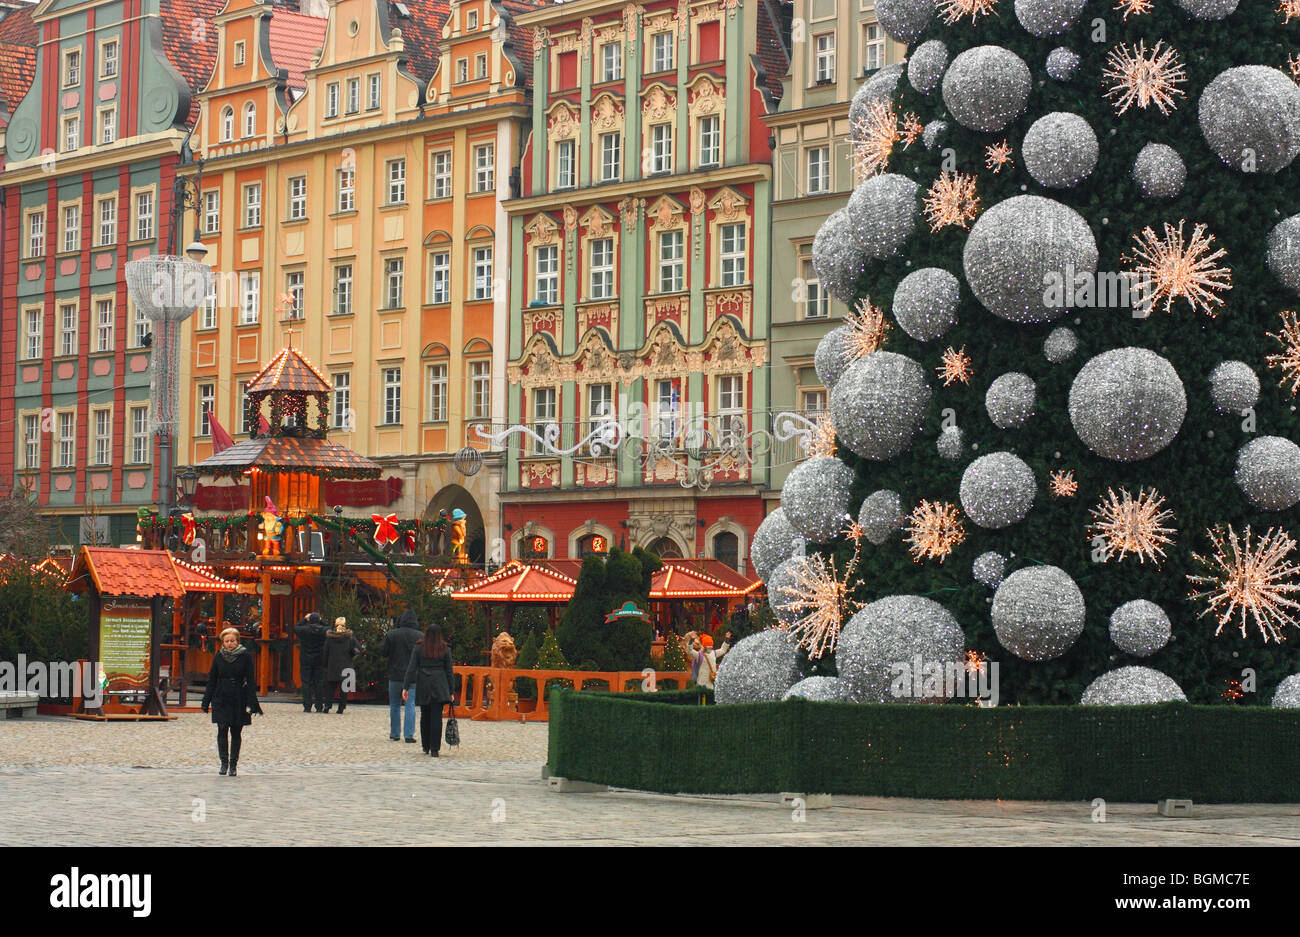 Wroclaw Old Market Christmas tree Stock Photo